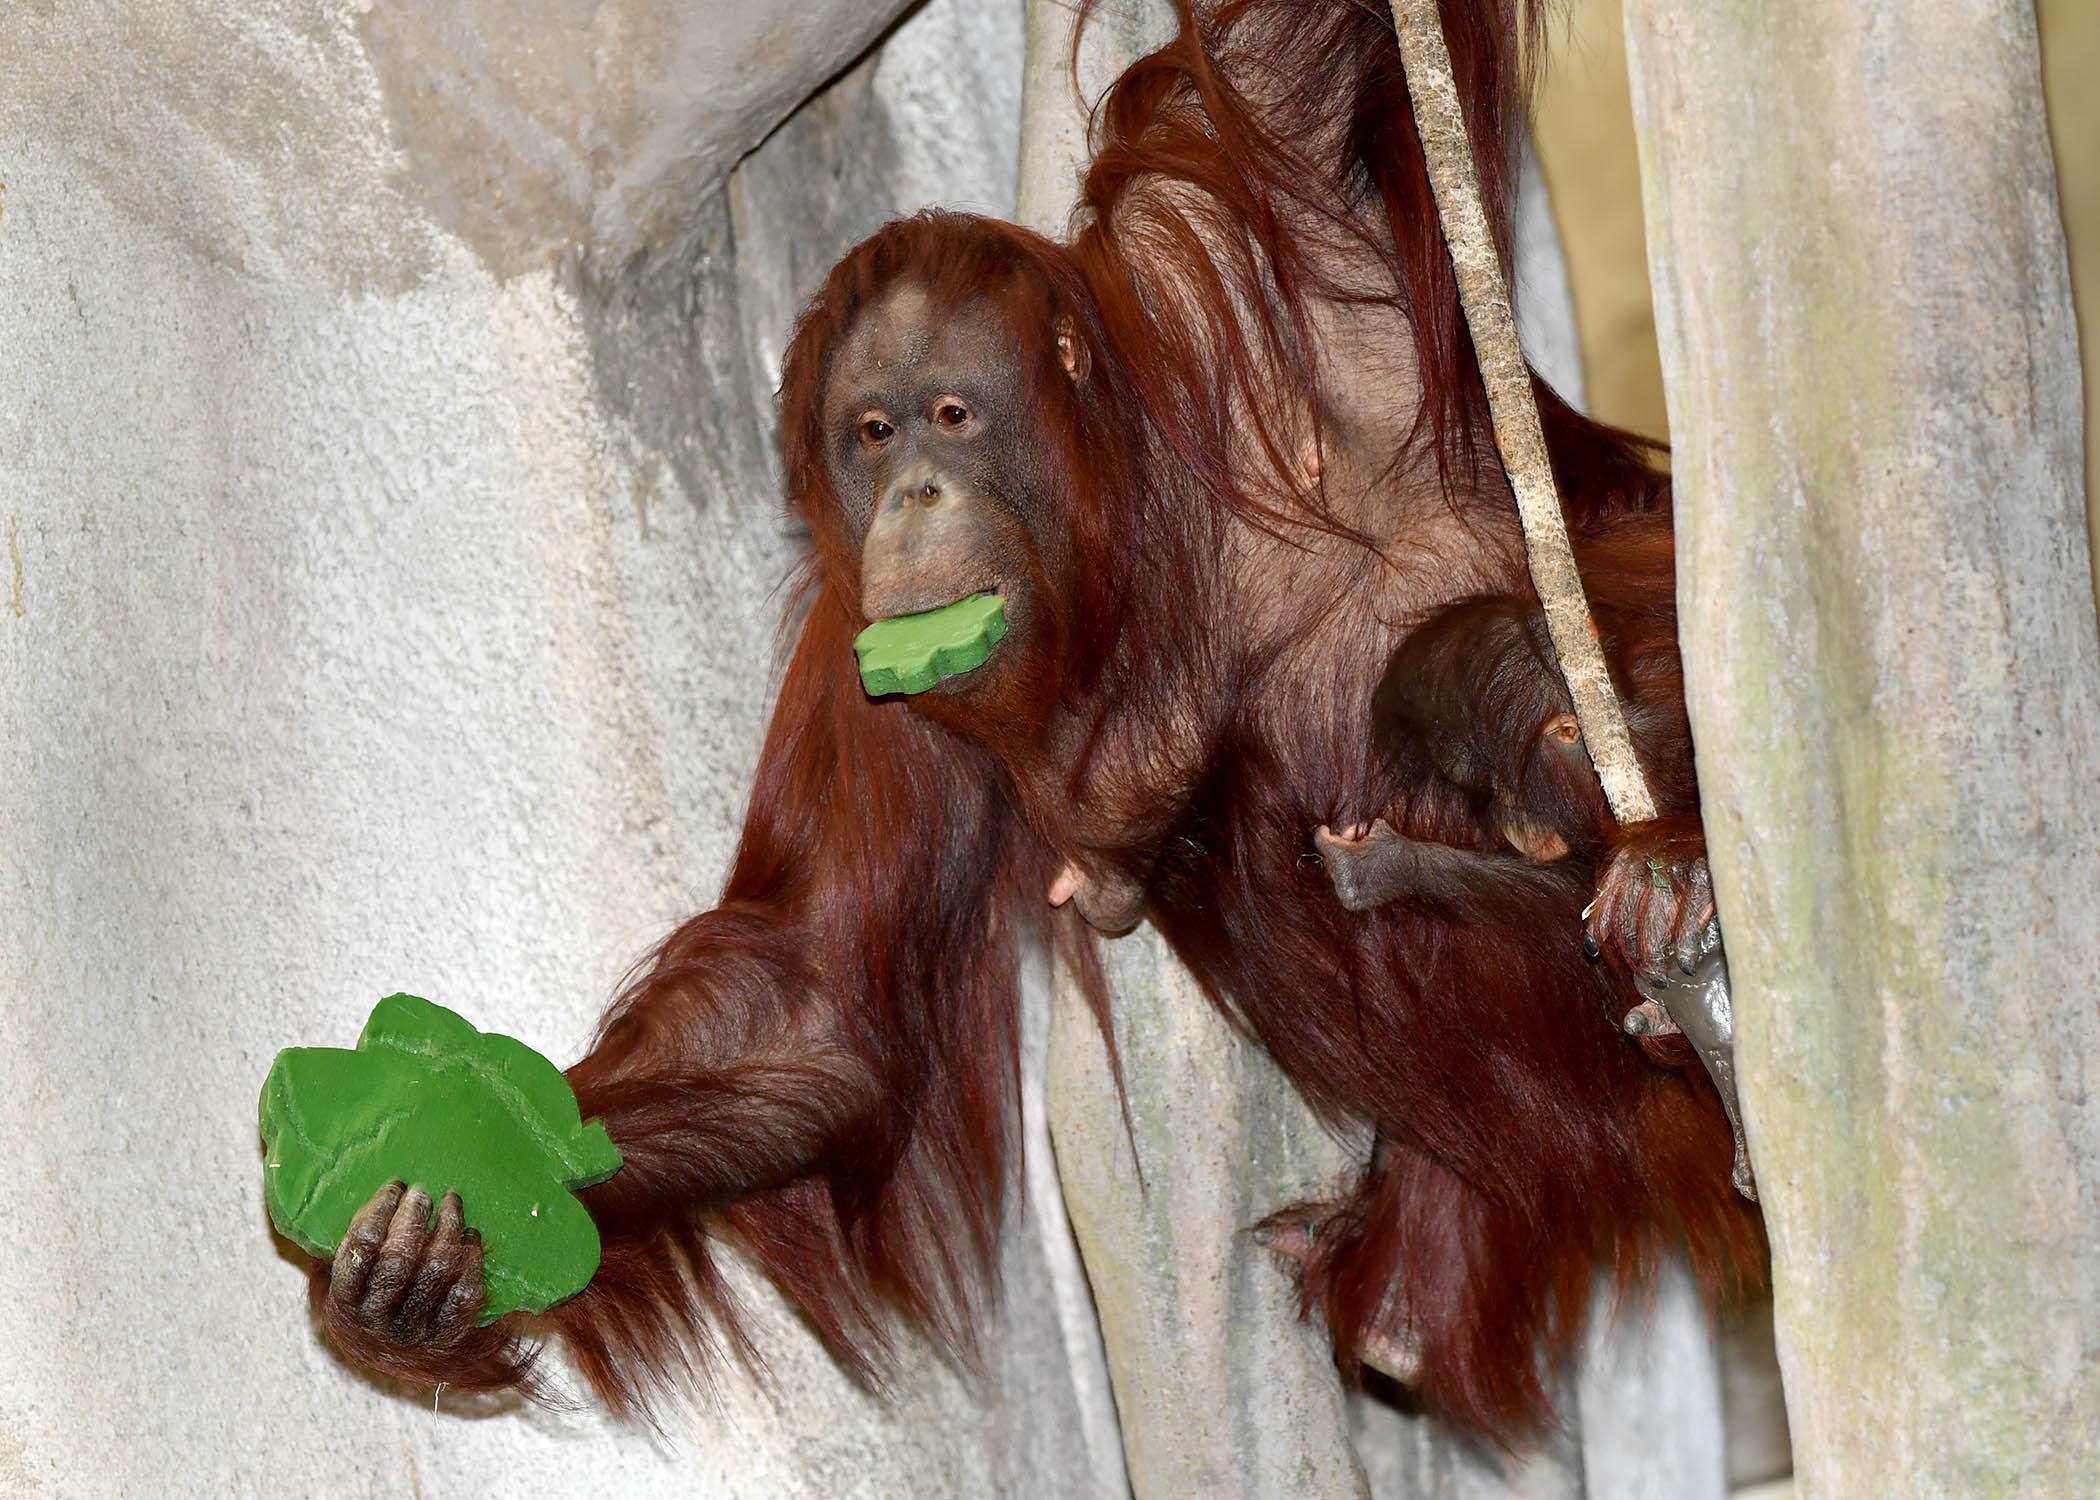 Sophia, a Bornean orangutan at Brookfield Zoo, and her daughter Heidi, who is clinging to mom, received shamrock-shaped treats made of biscuit and gelatin in celebration of St. Patrick’s Day. (Jim Schulz / Chicago Zoological Society)